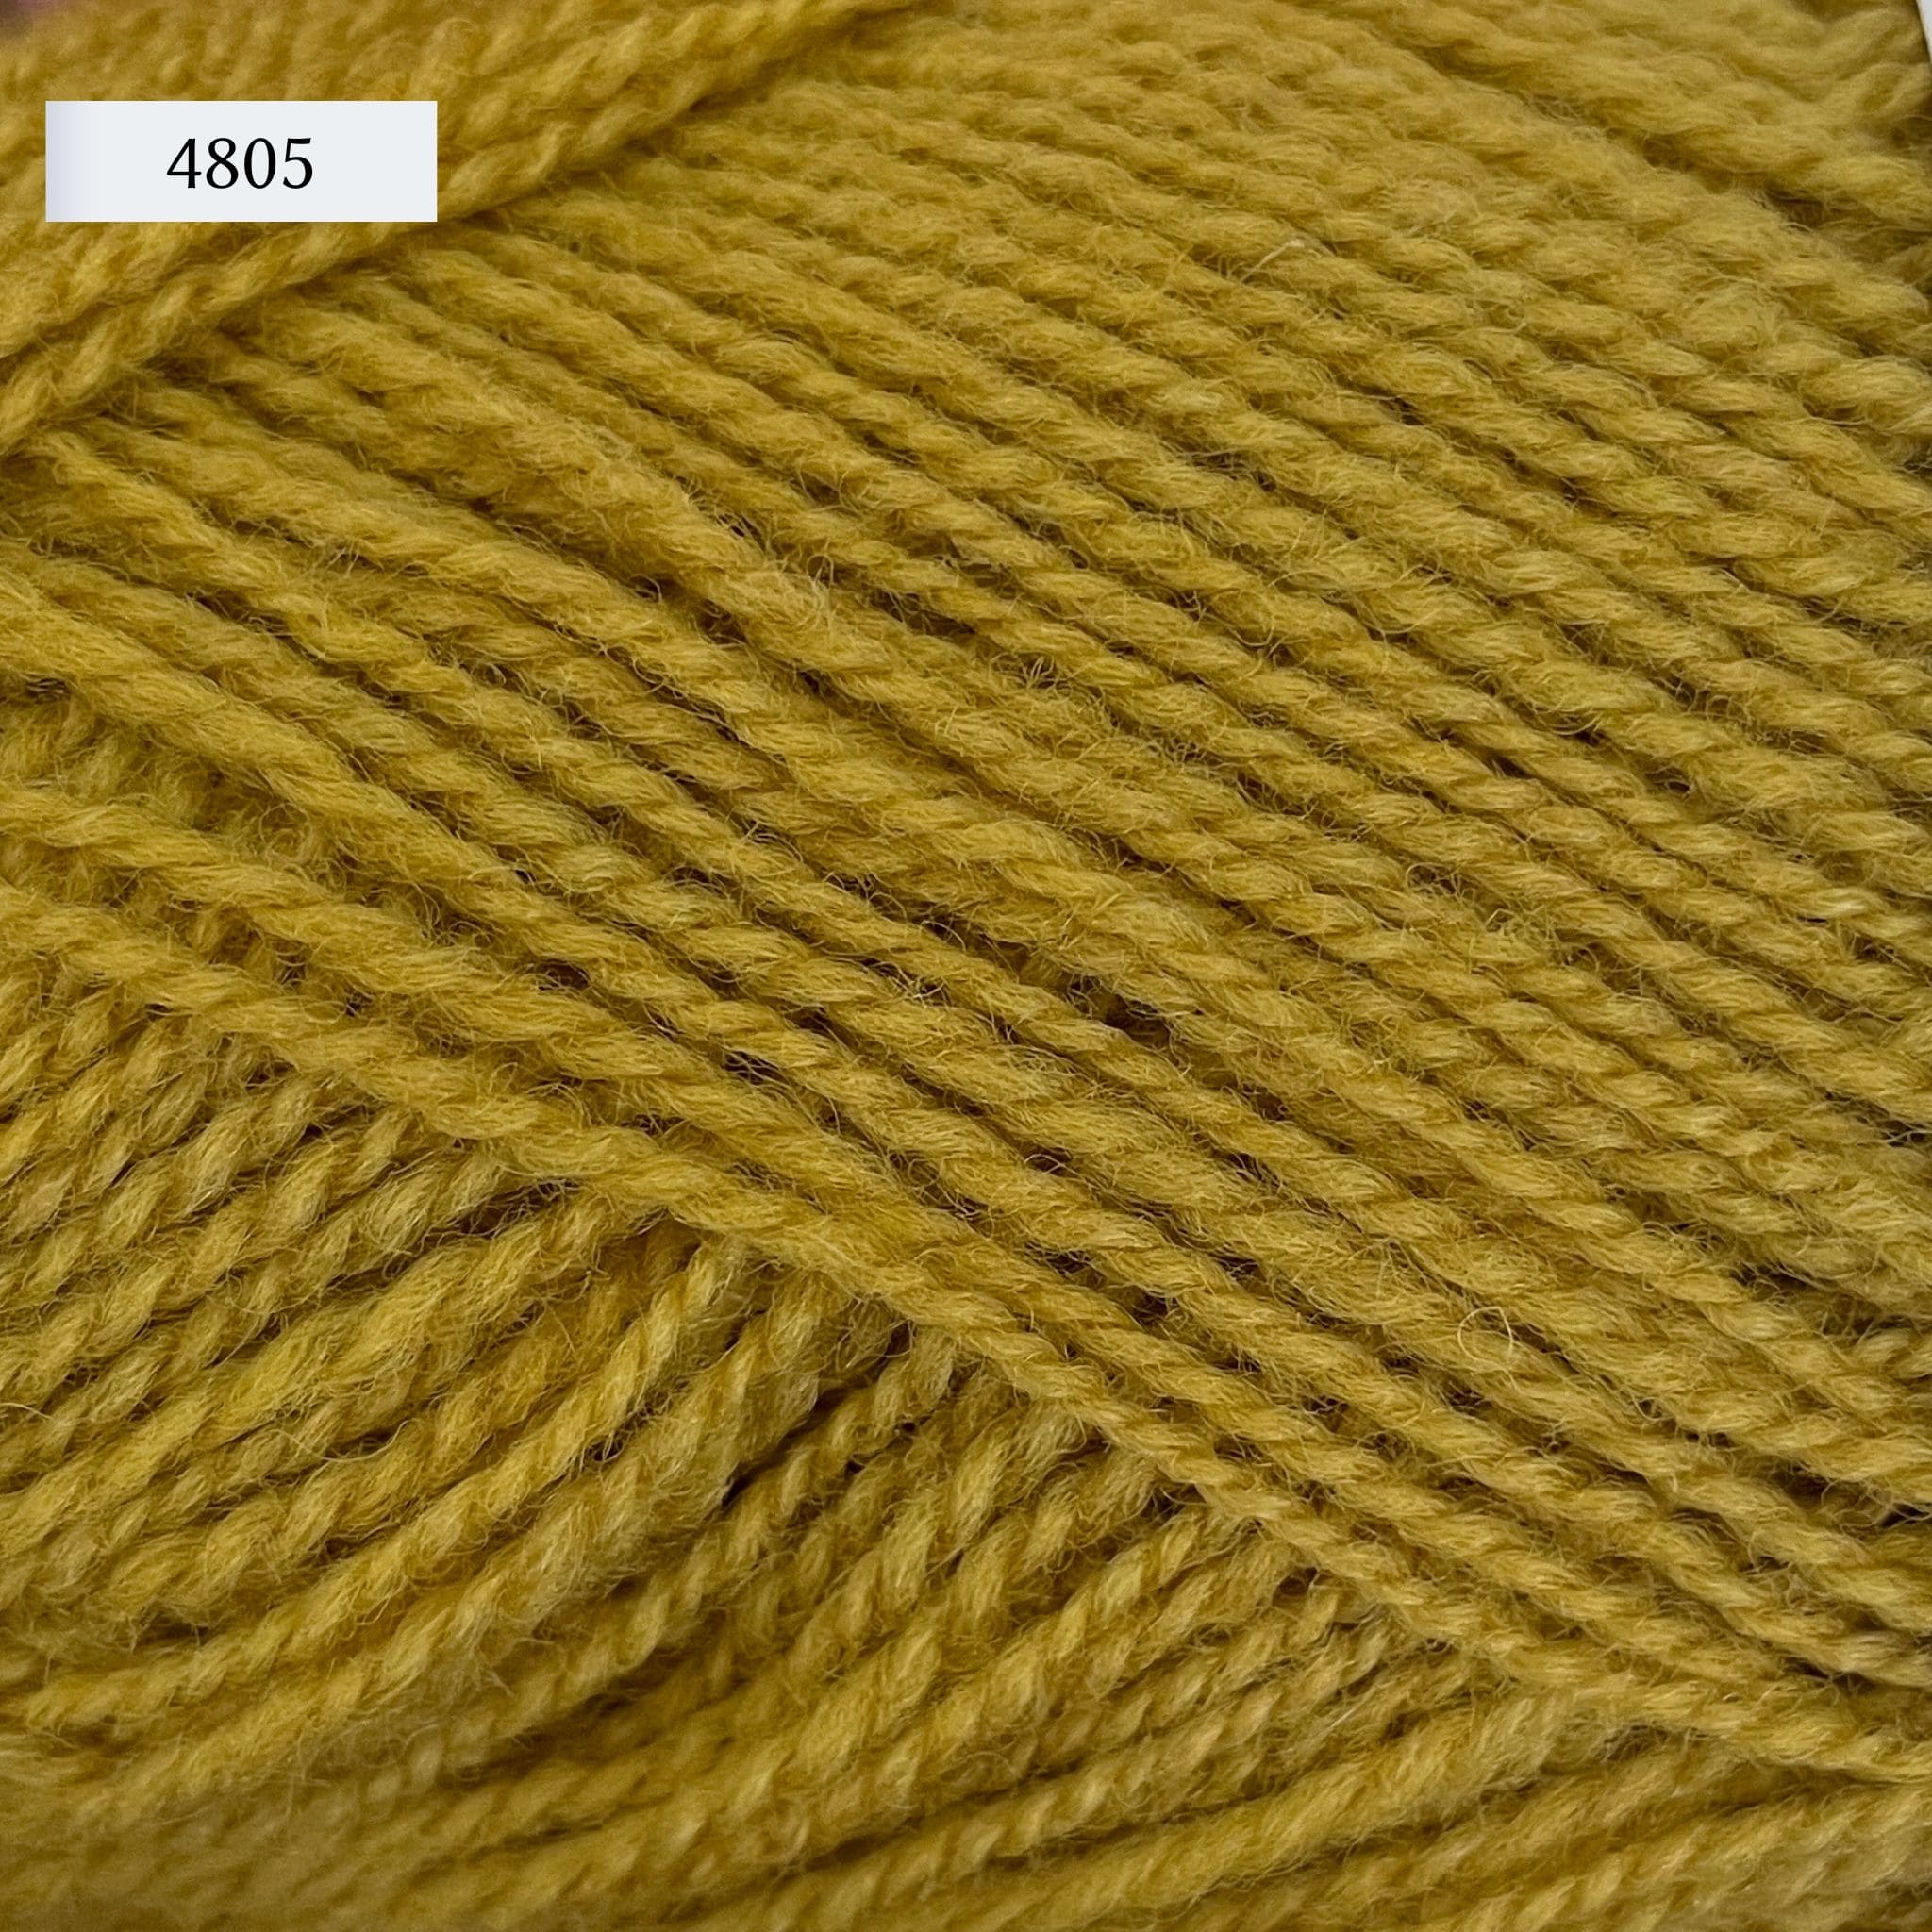 Rauma Gammelserie 2ply wool yarn, fingering weight, in color 4805, a cool yellow gold